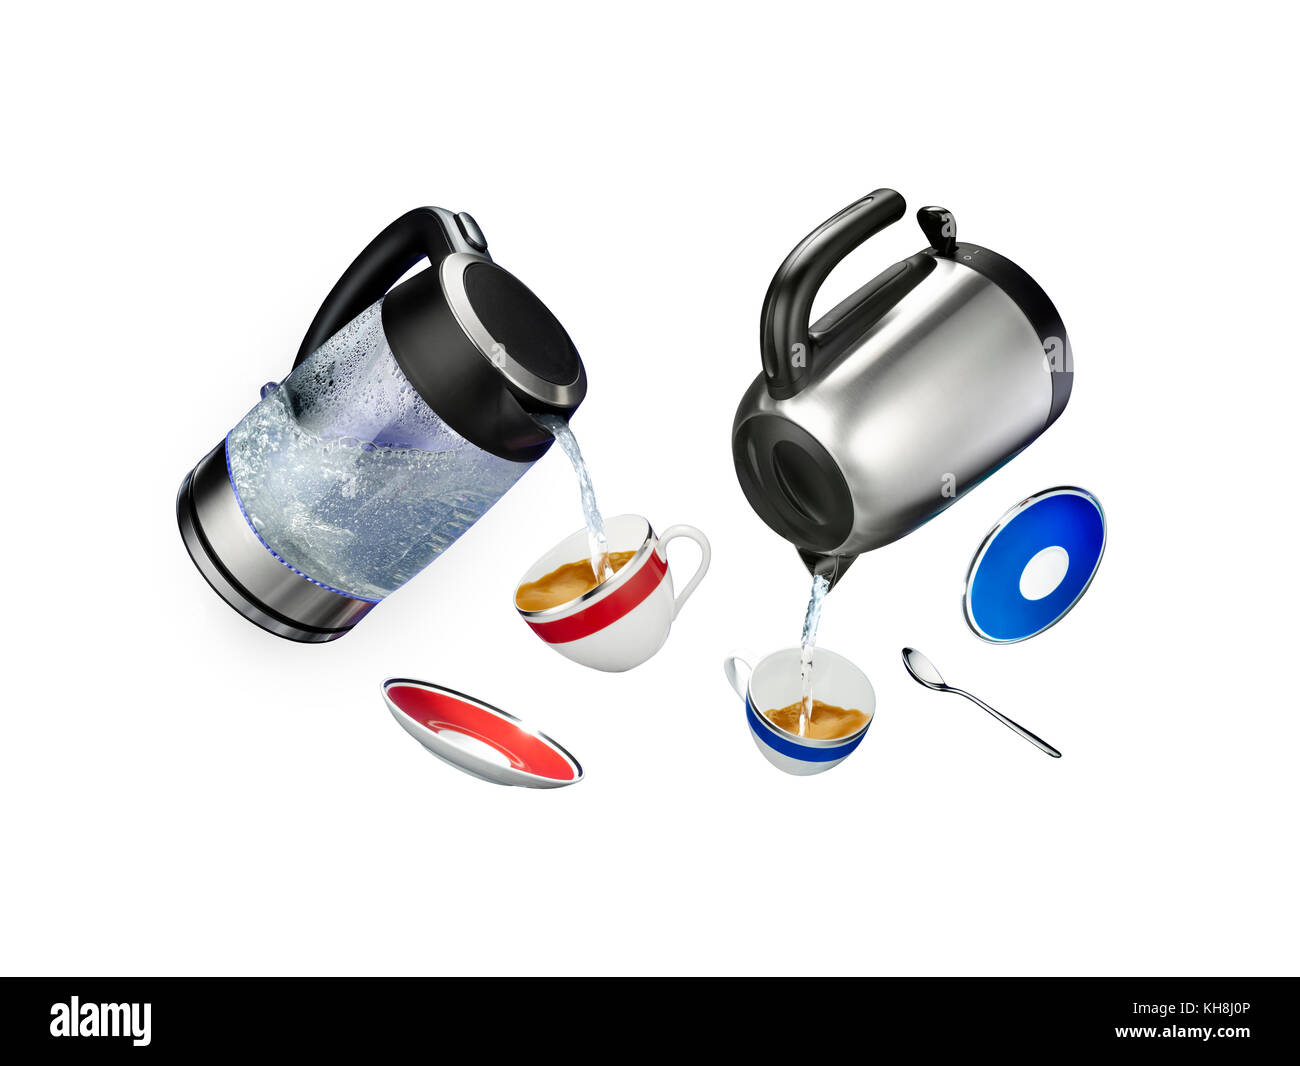 Tumbling items making a cup of tea Stock Photo